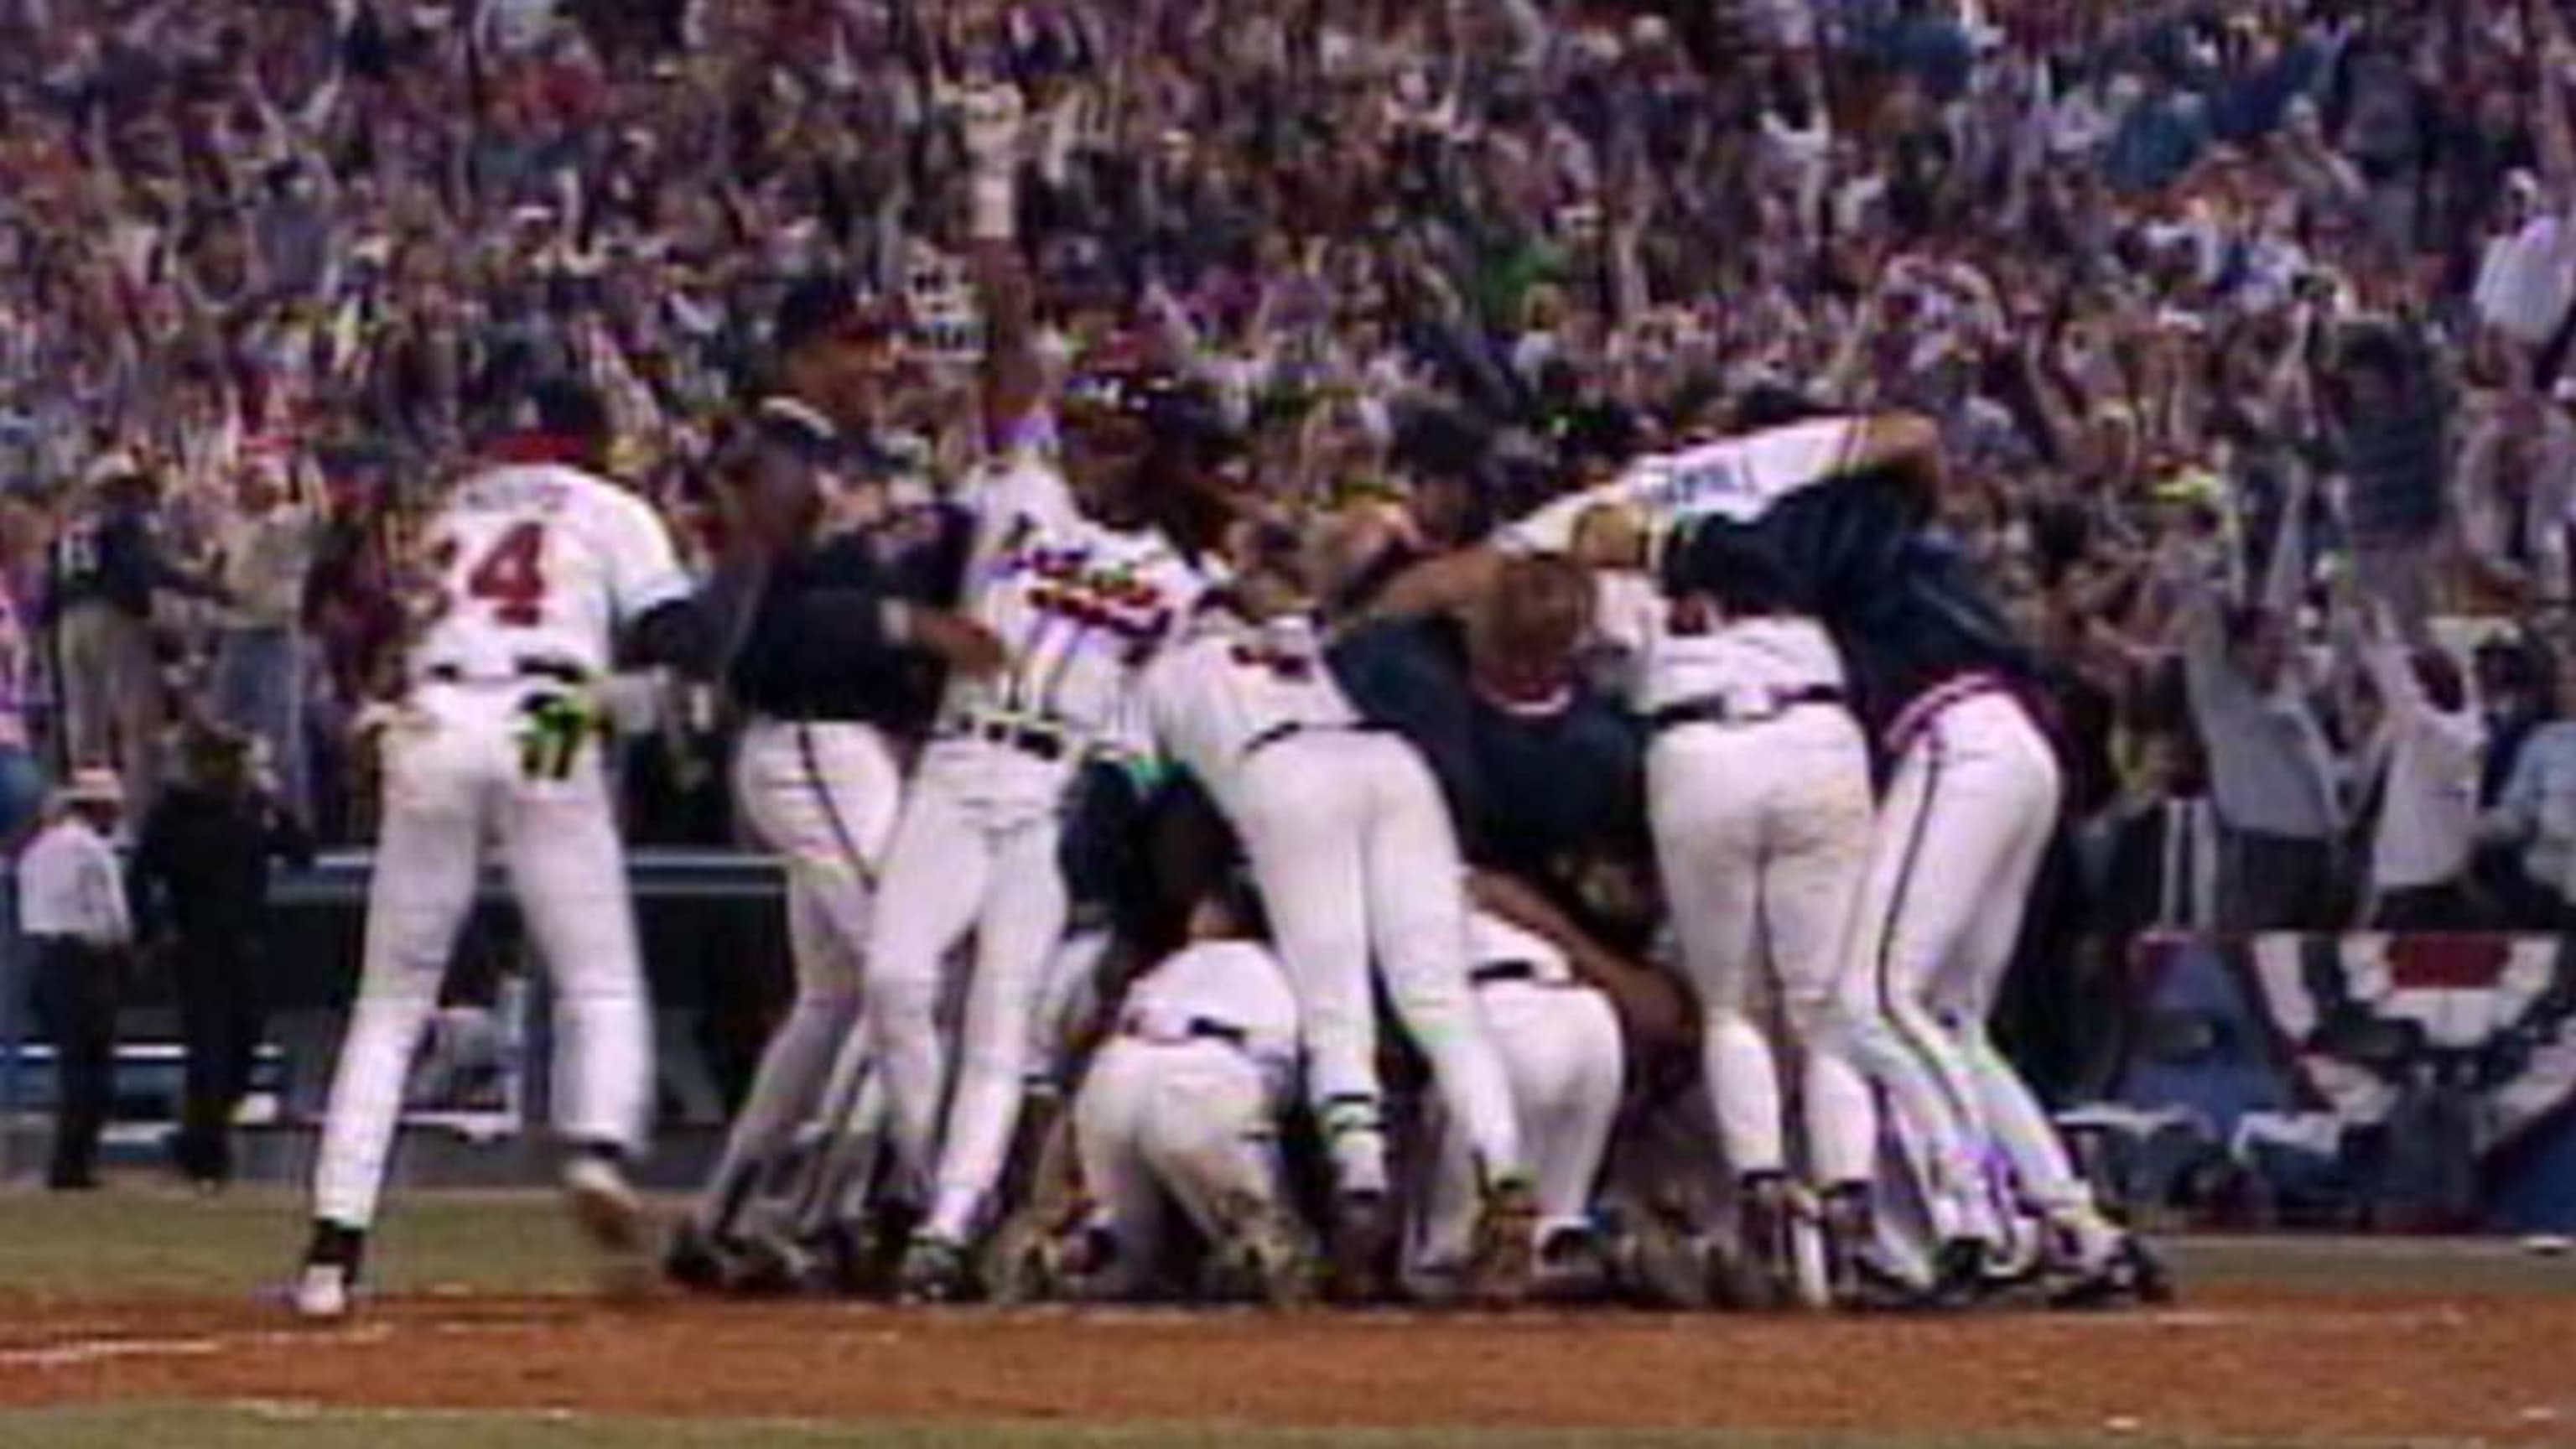 1992 NLCS Gm3: Wakefield gives Pirates win 